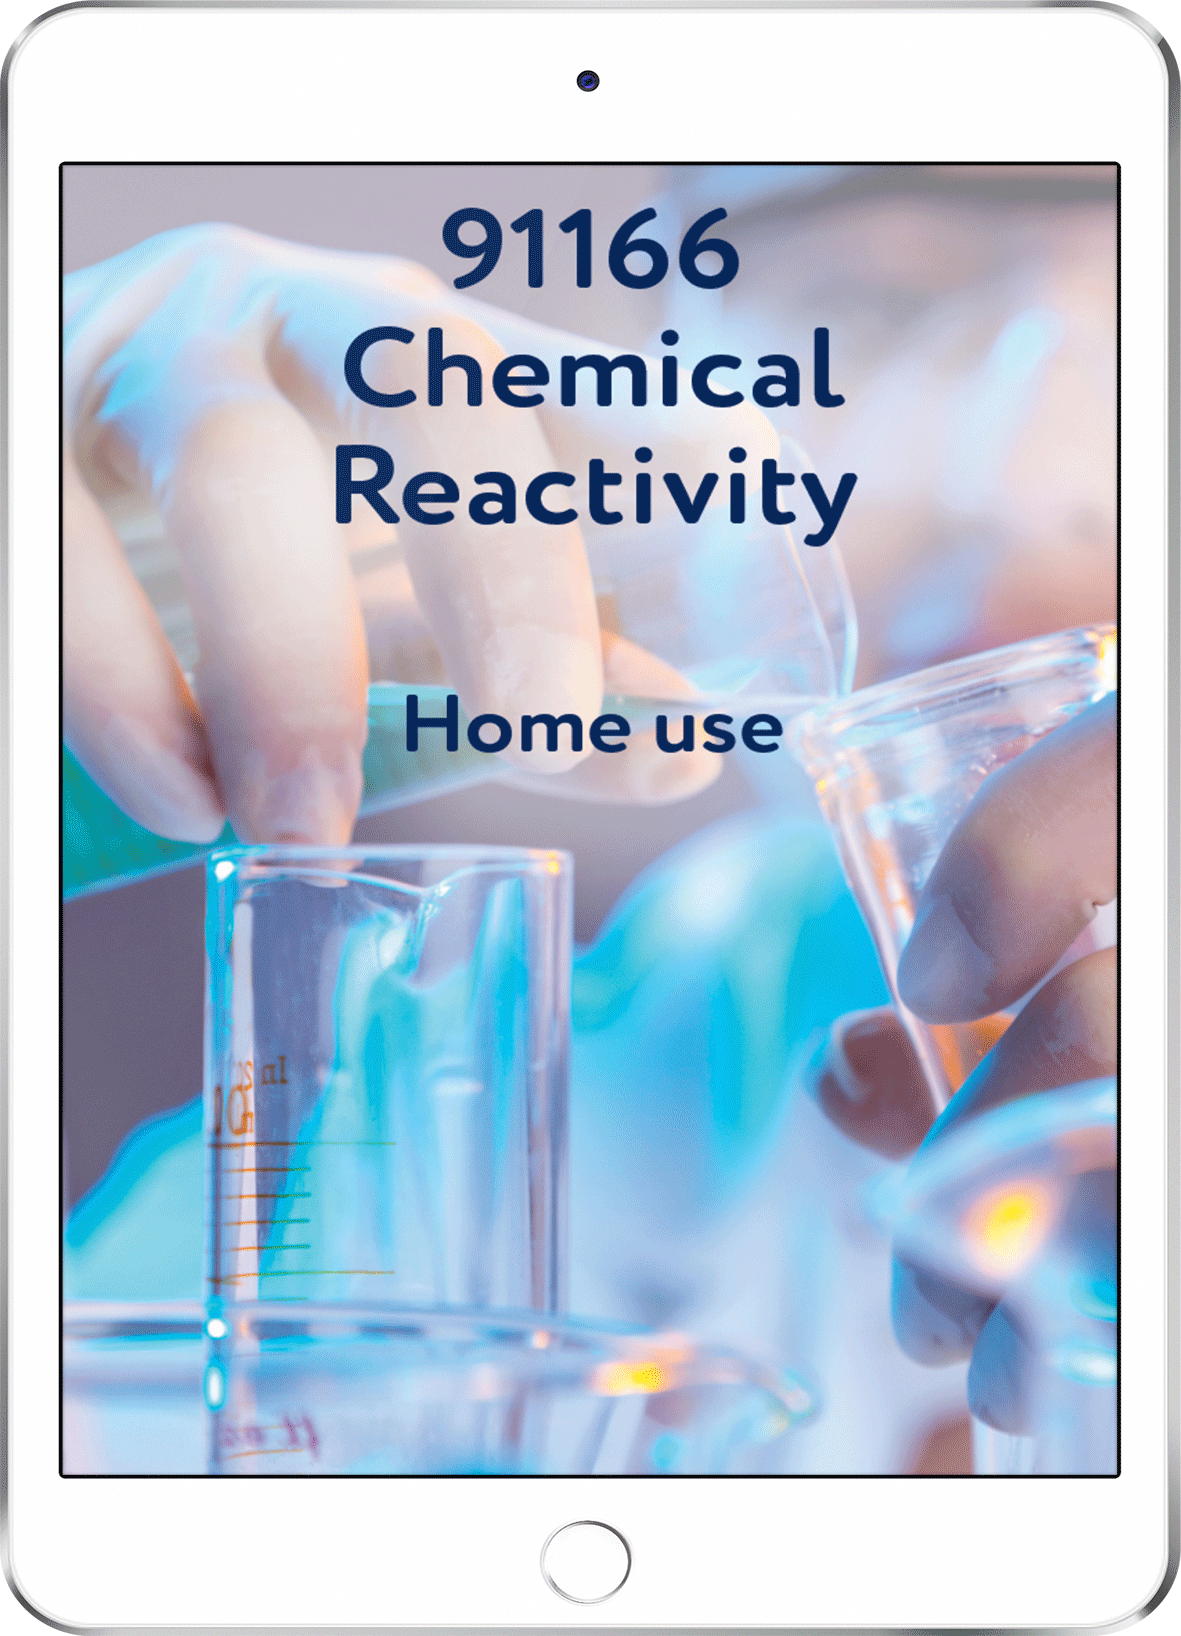 91166 Chemical Reactivity - Home Use